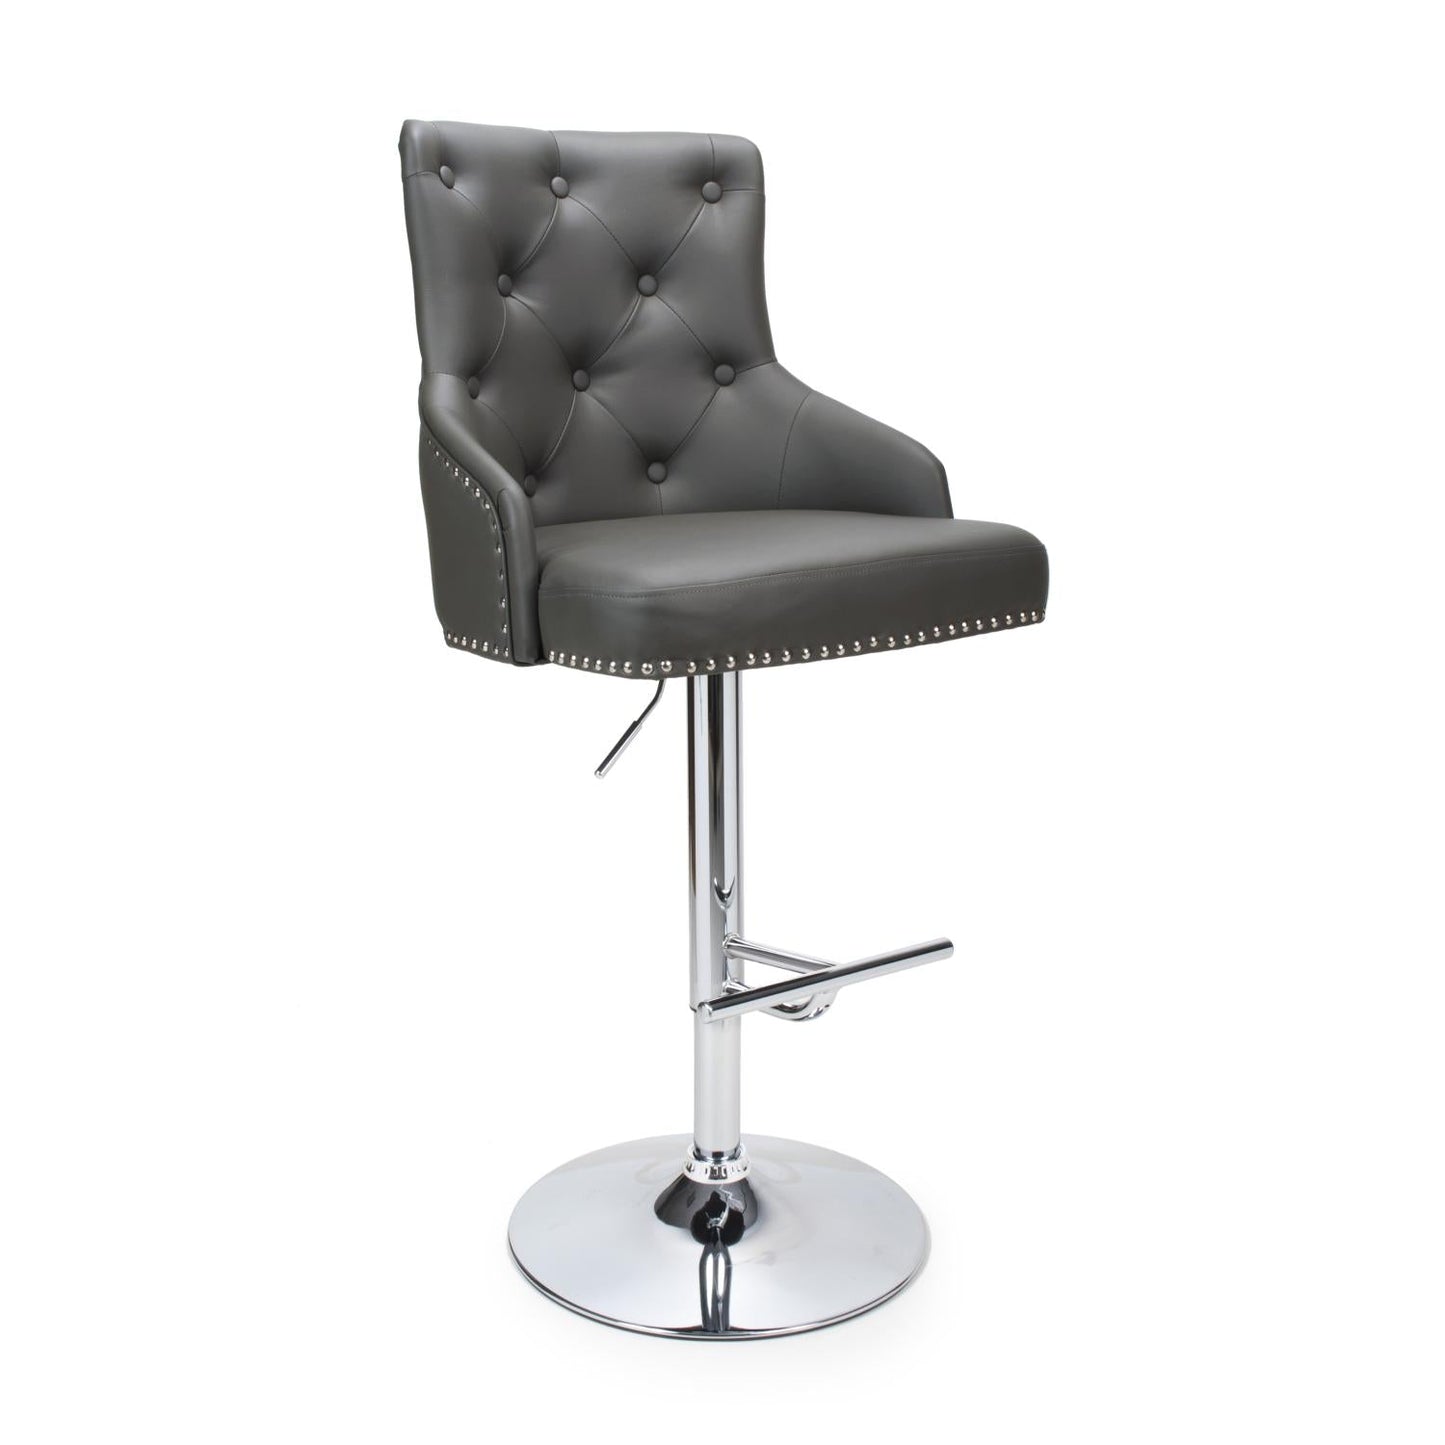 Rocco leather swivel  bar stools graphite grey 1 only  for collection WhatsApp 0896031545